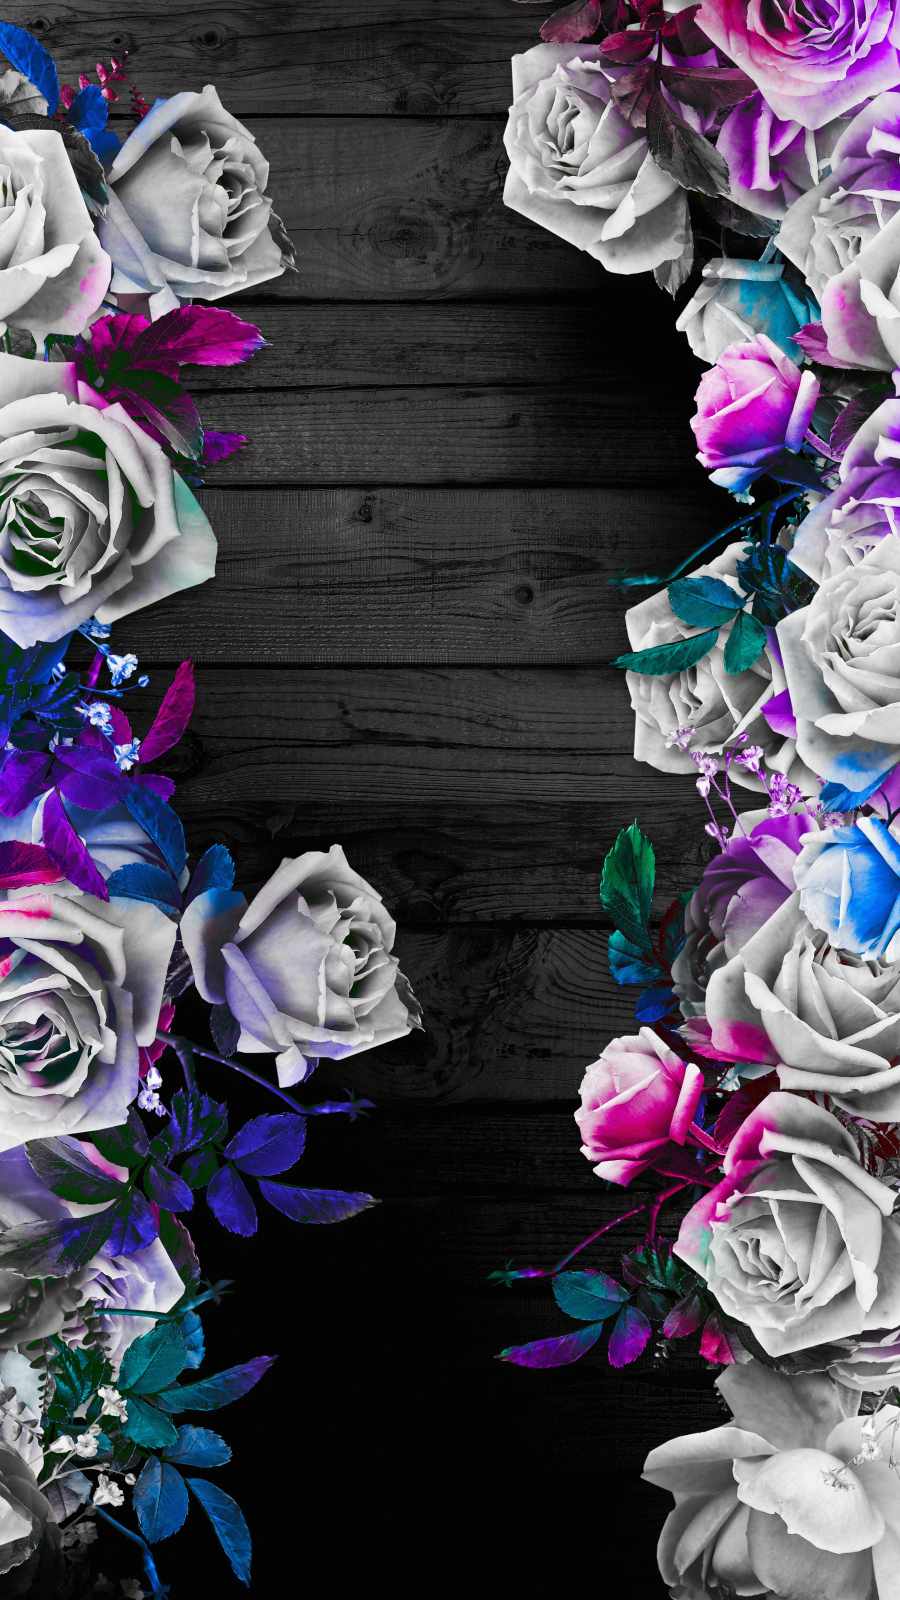 Rose Background - IPhone Wallpapers : iPhone Wallpapers